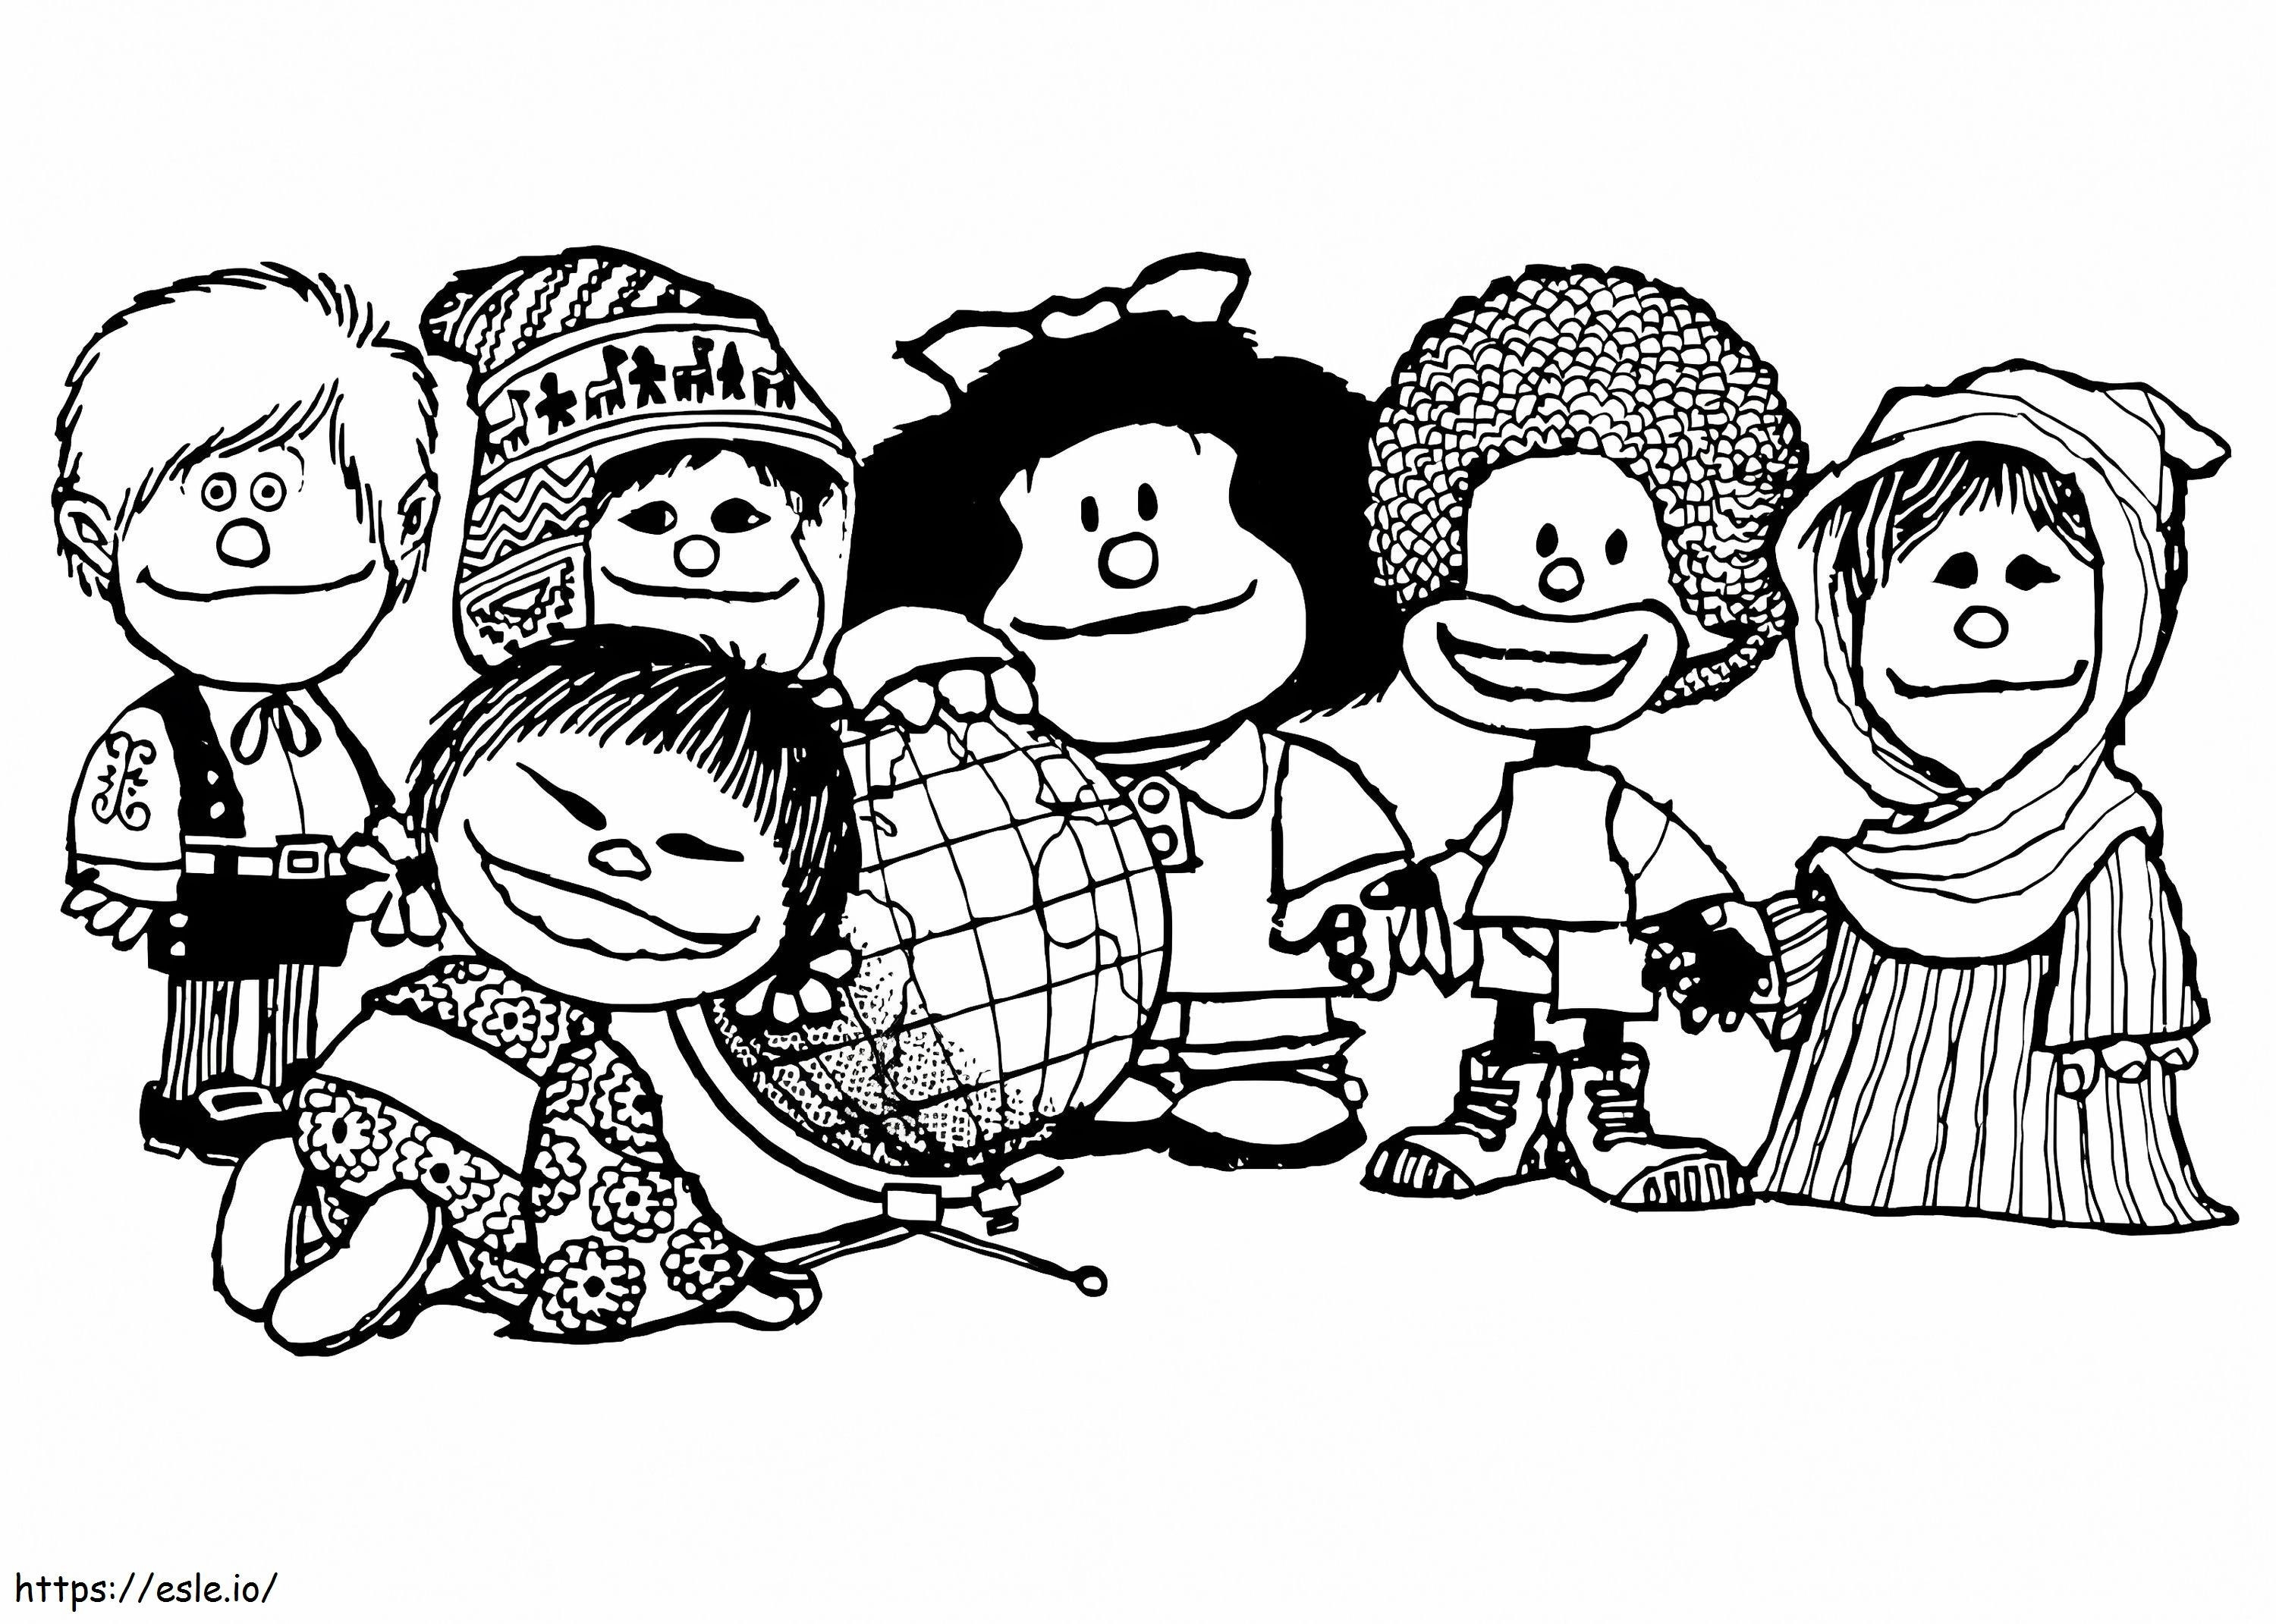 Mafalda With Friends coloring page